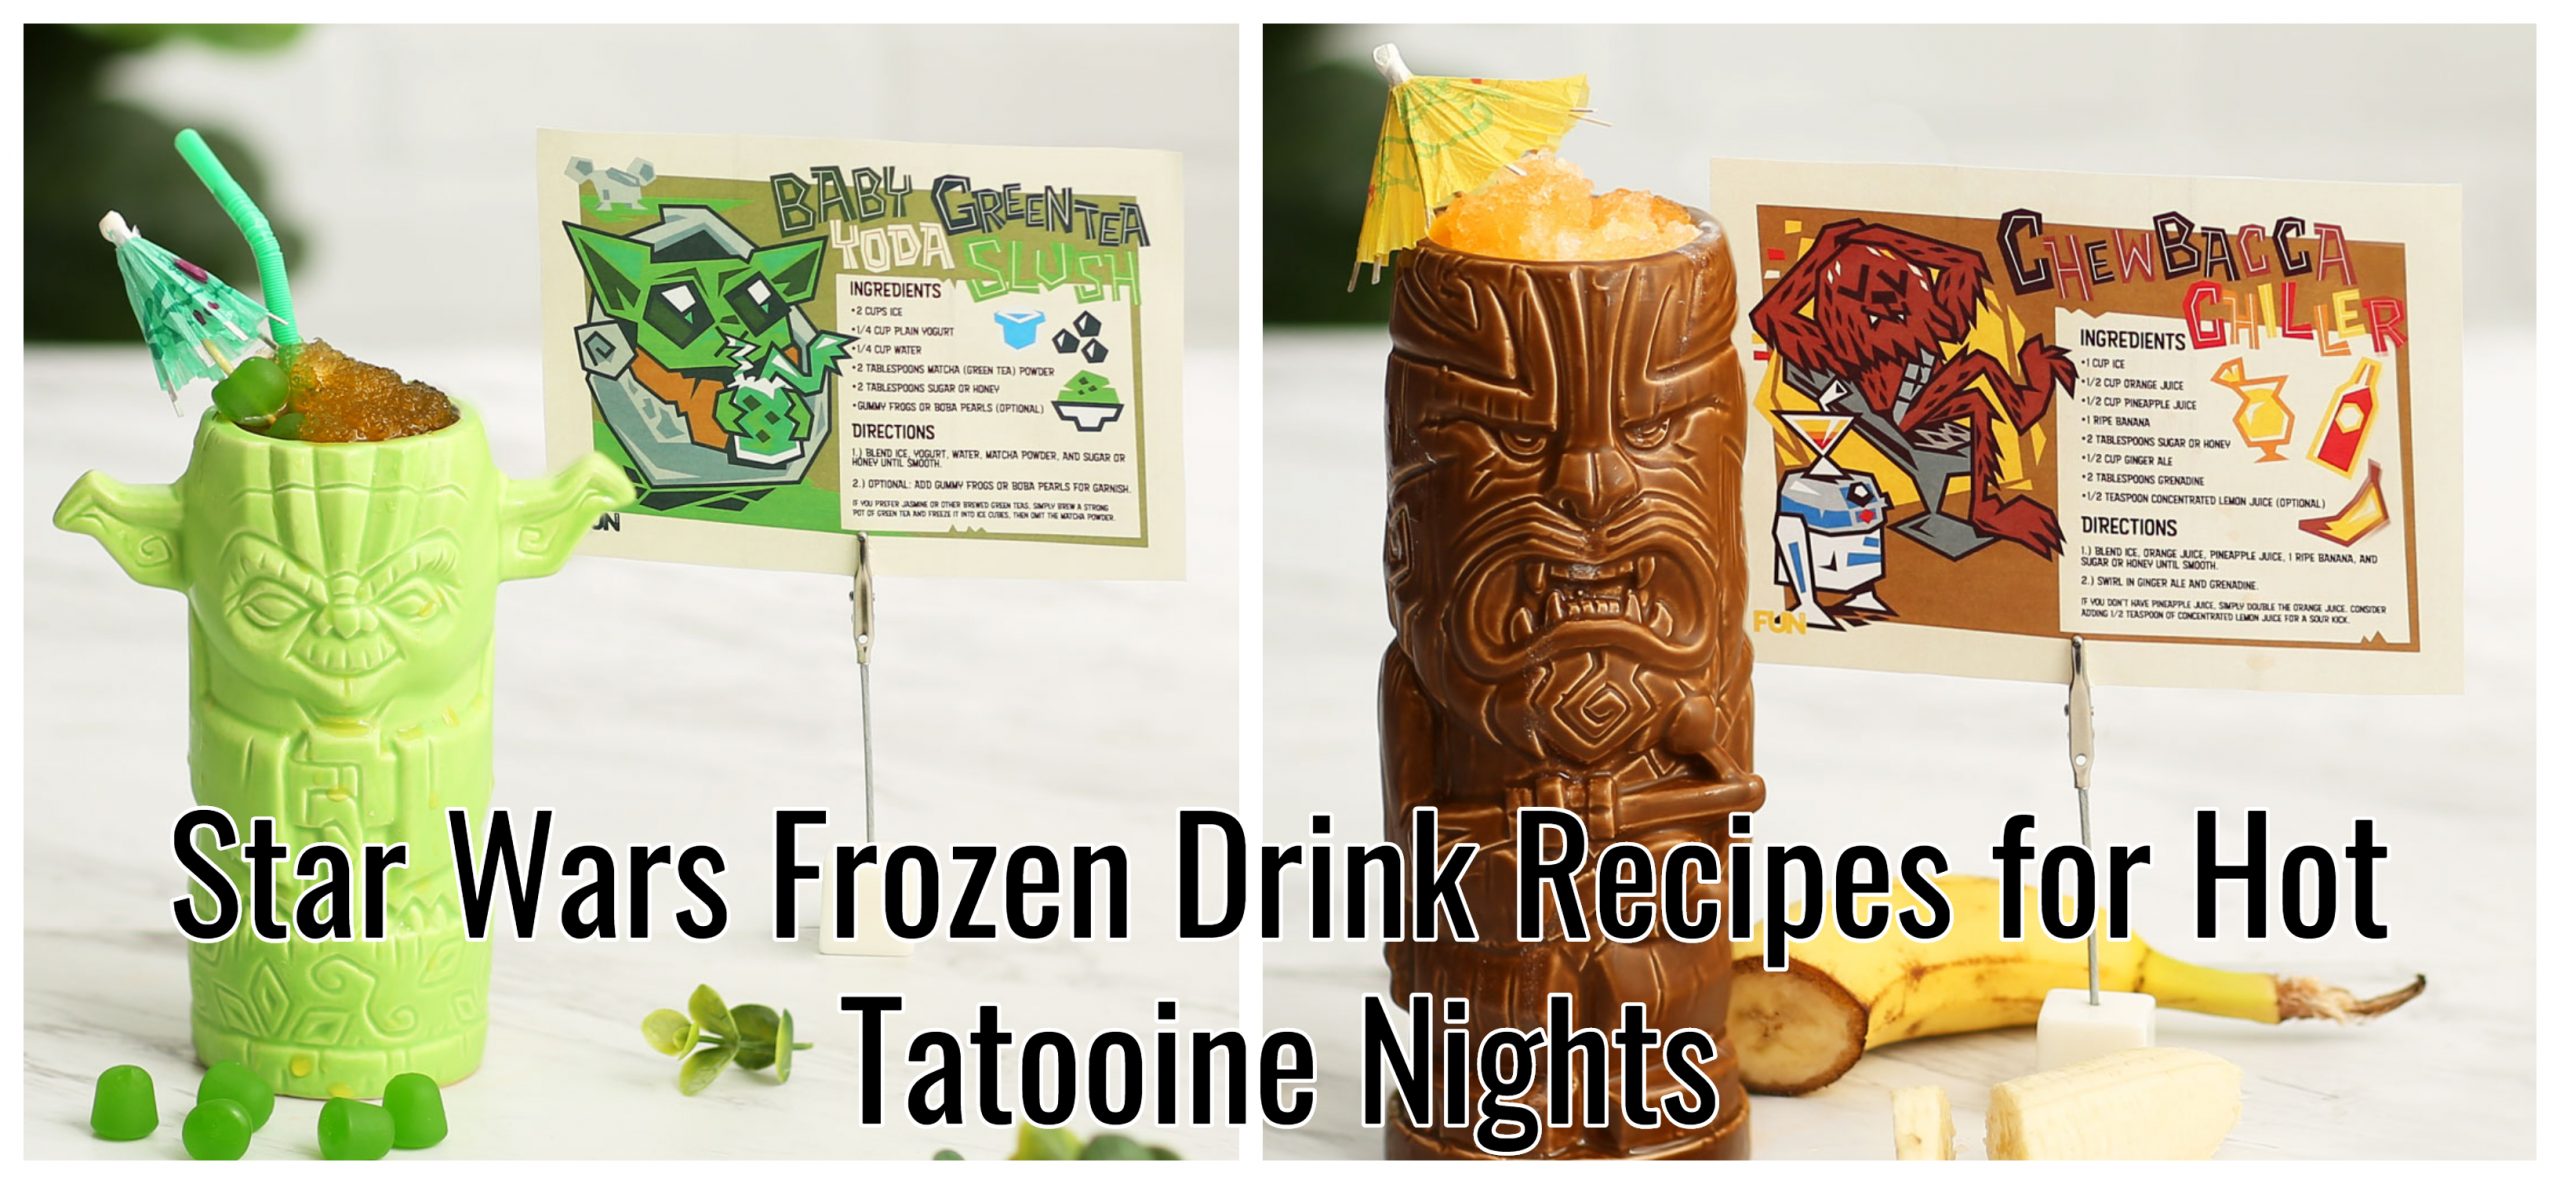 Star Wars Frozen Drink Recipes to try at home!